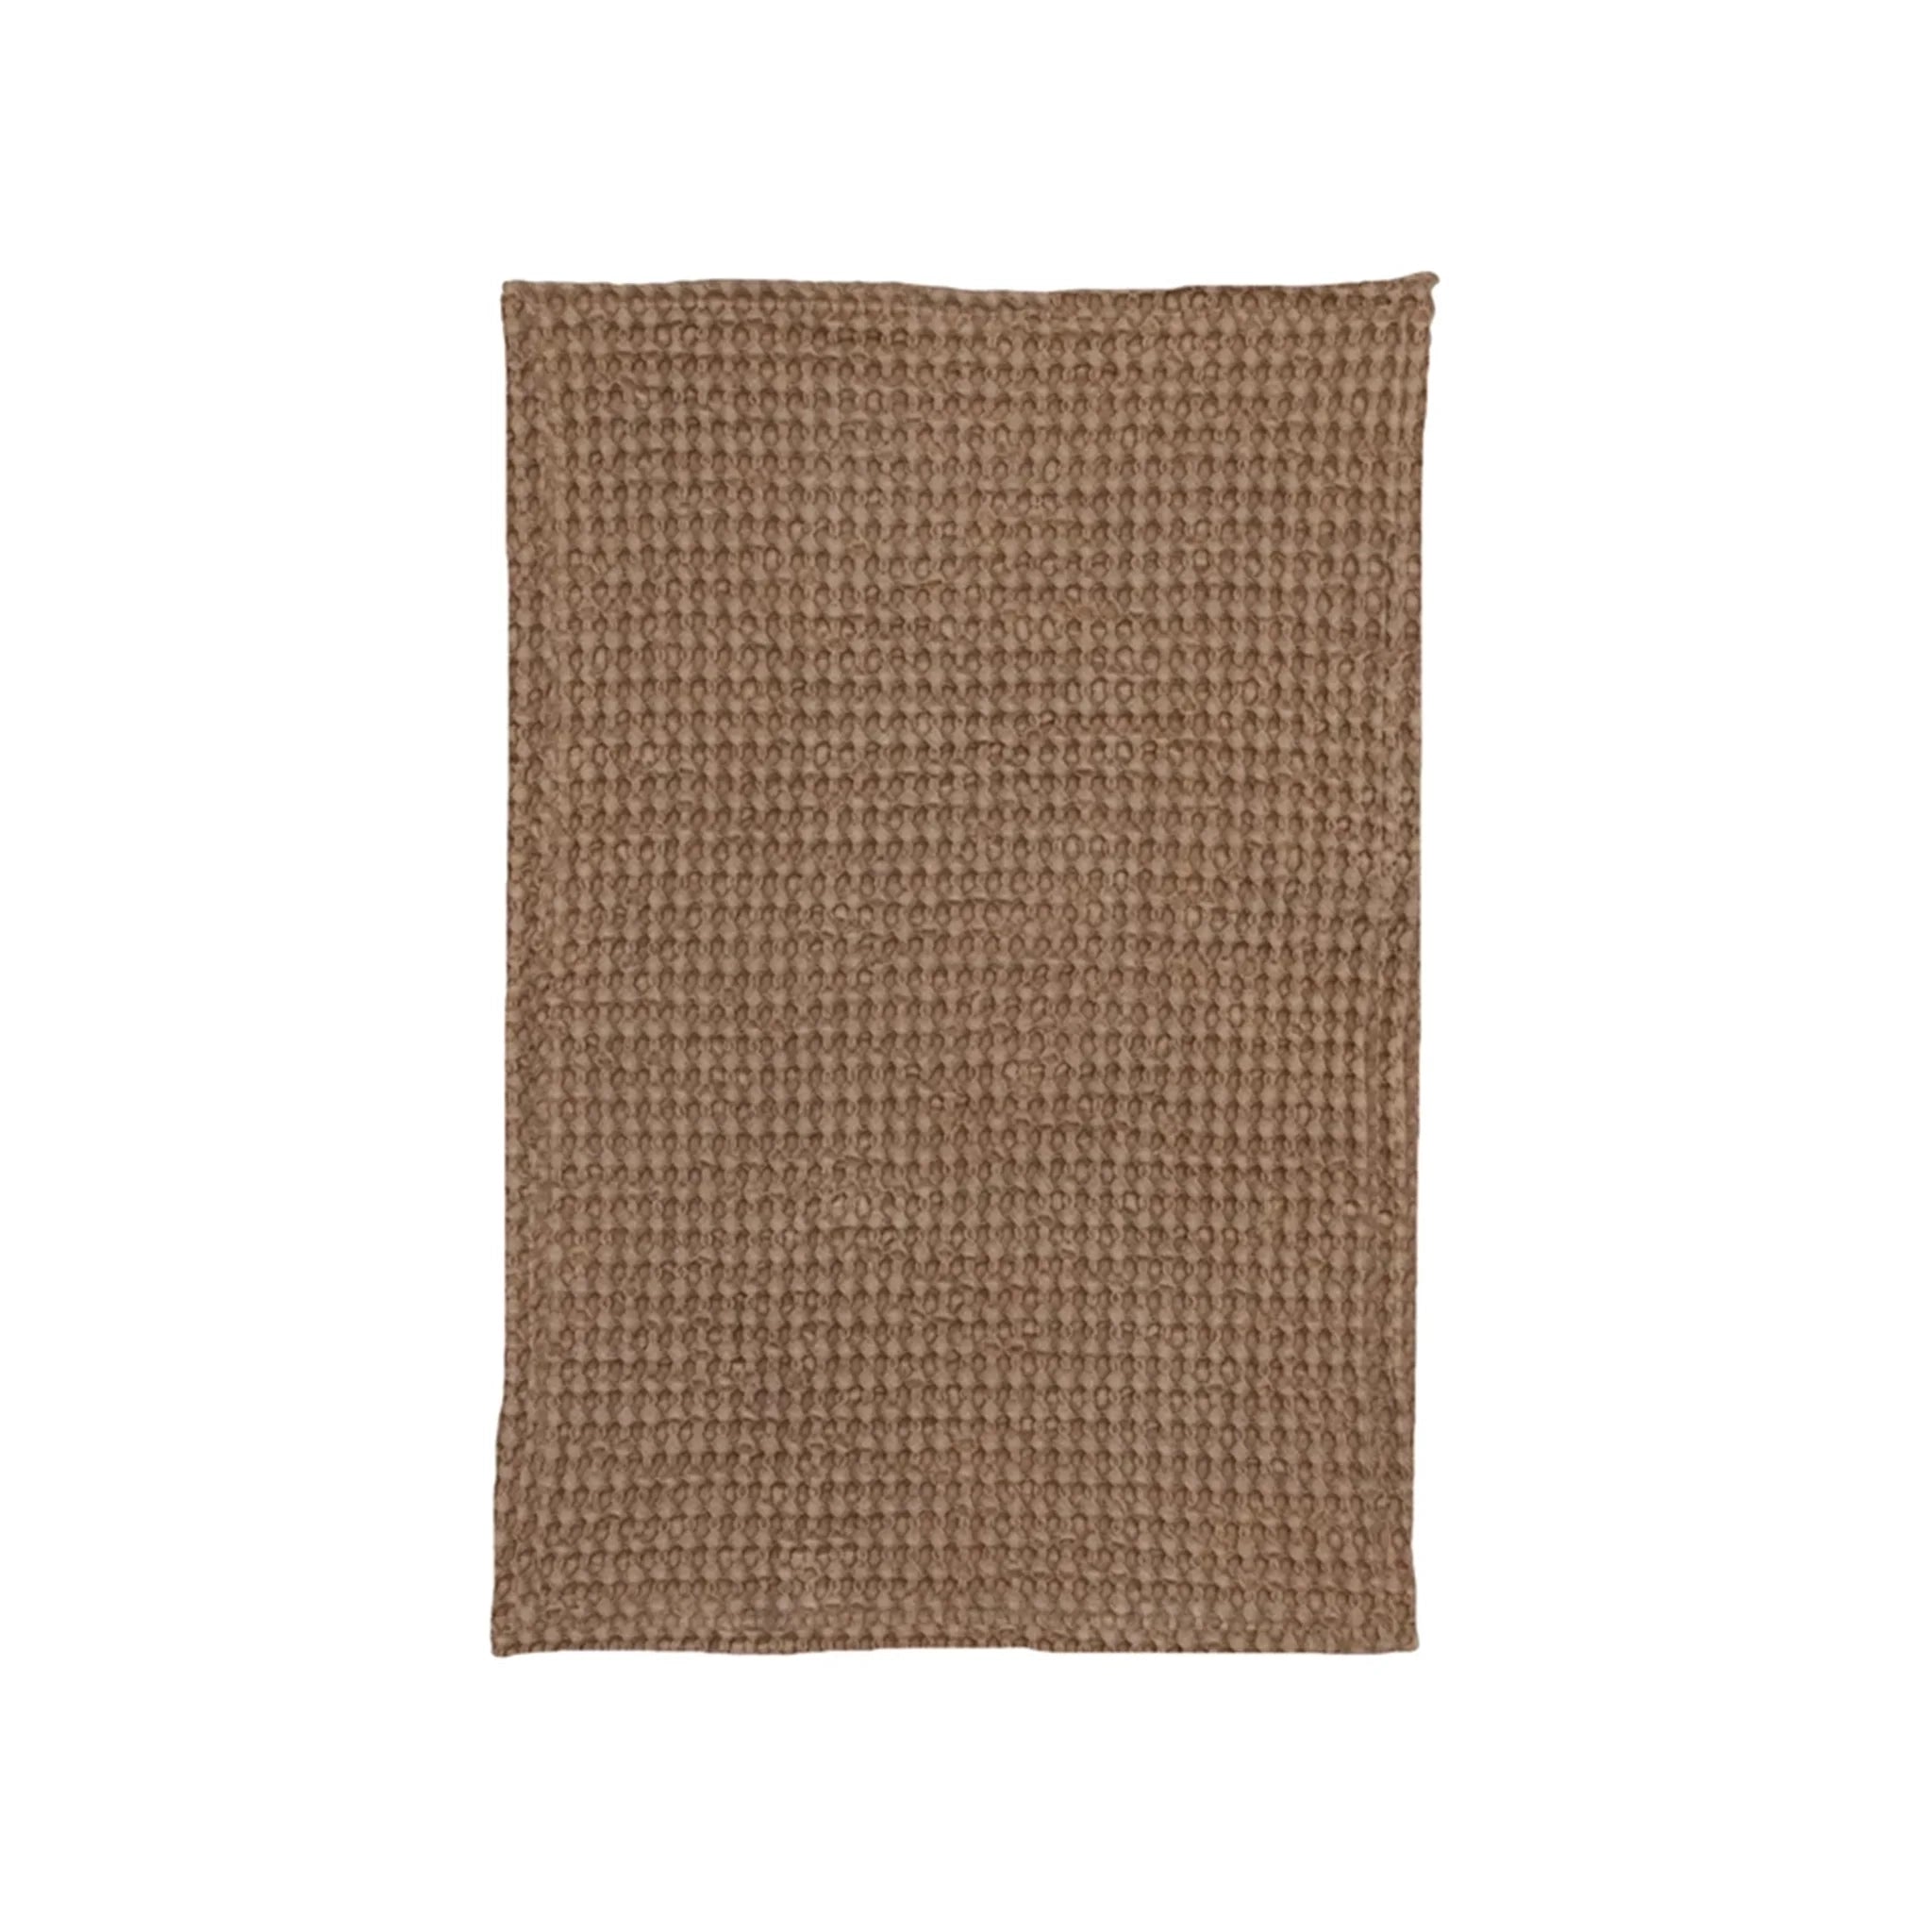 On a white background is a waffle knit brown tea towel. 